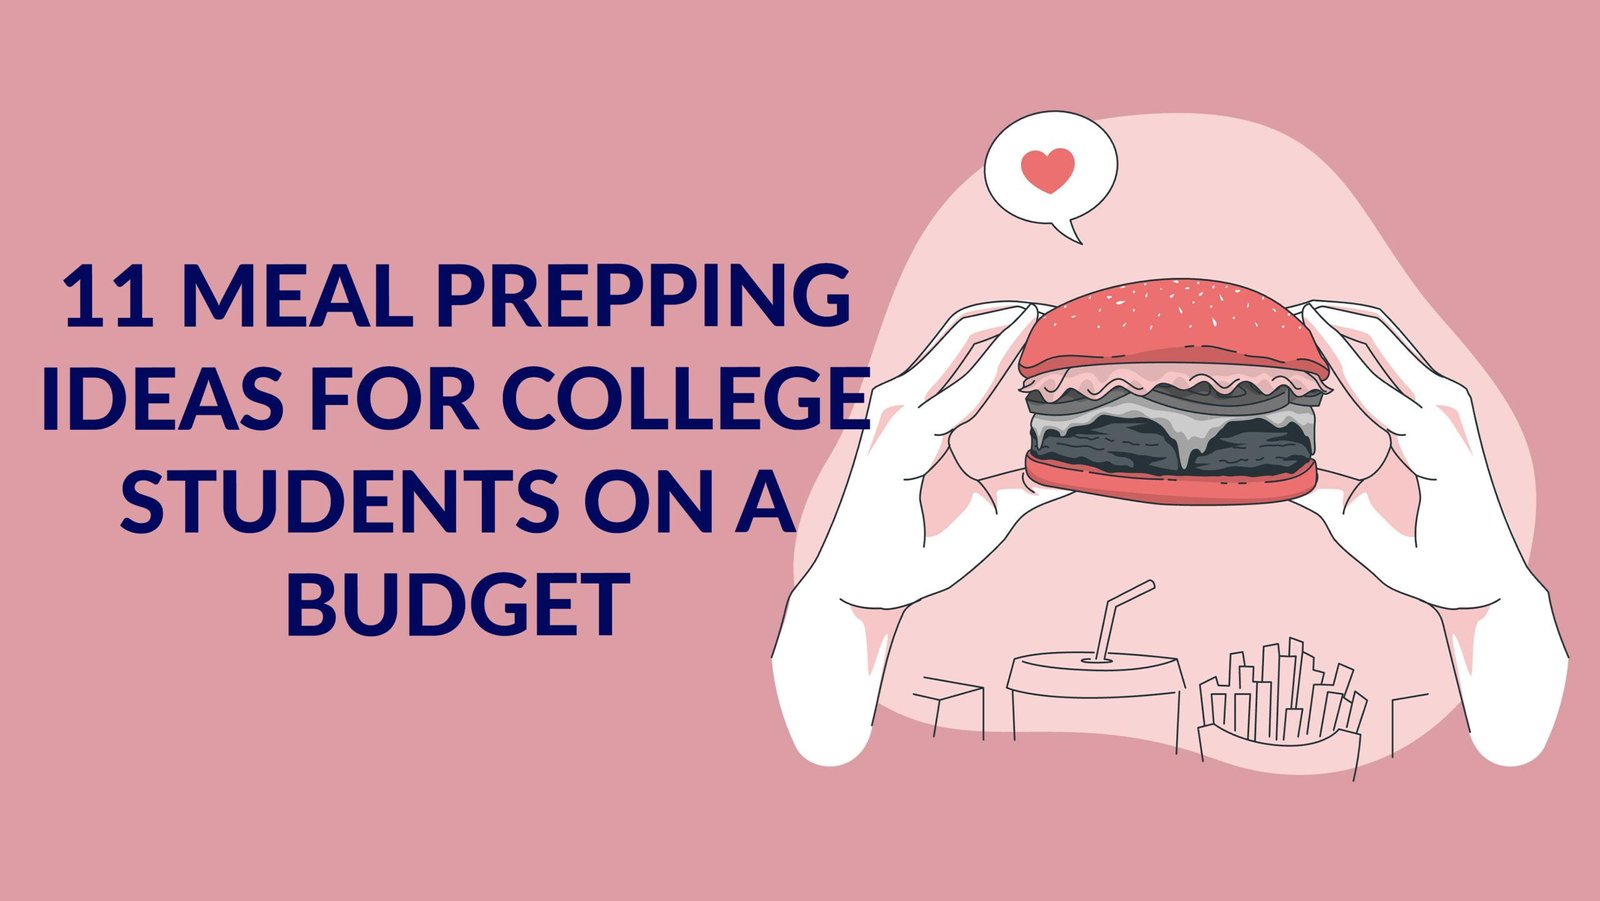 11-meal-prepping-ideas-for-college-students-on-a-budget-best-tips-for